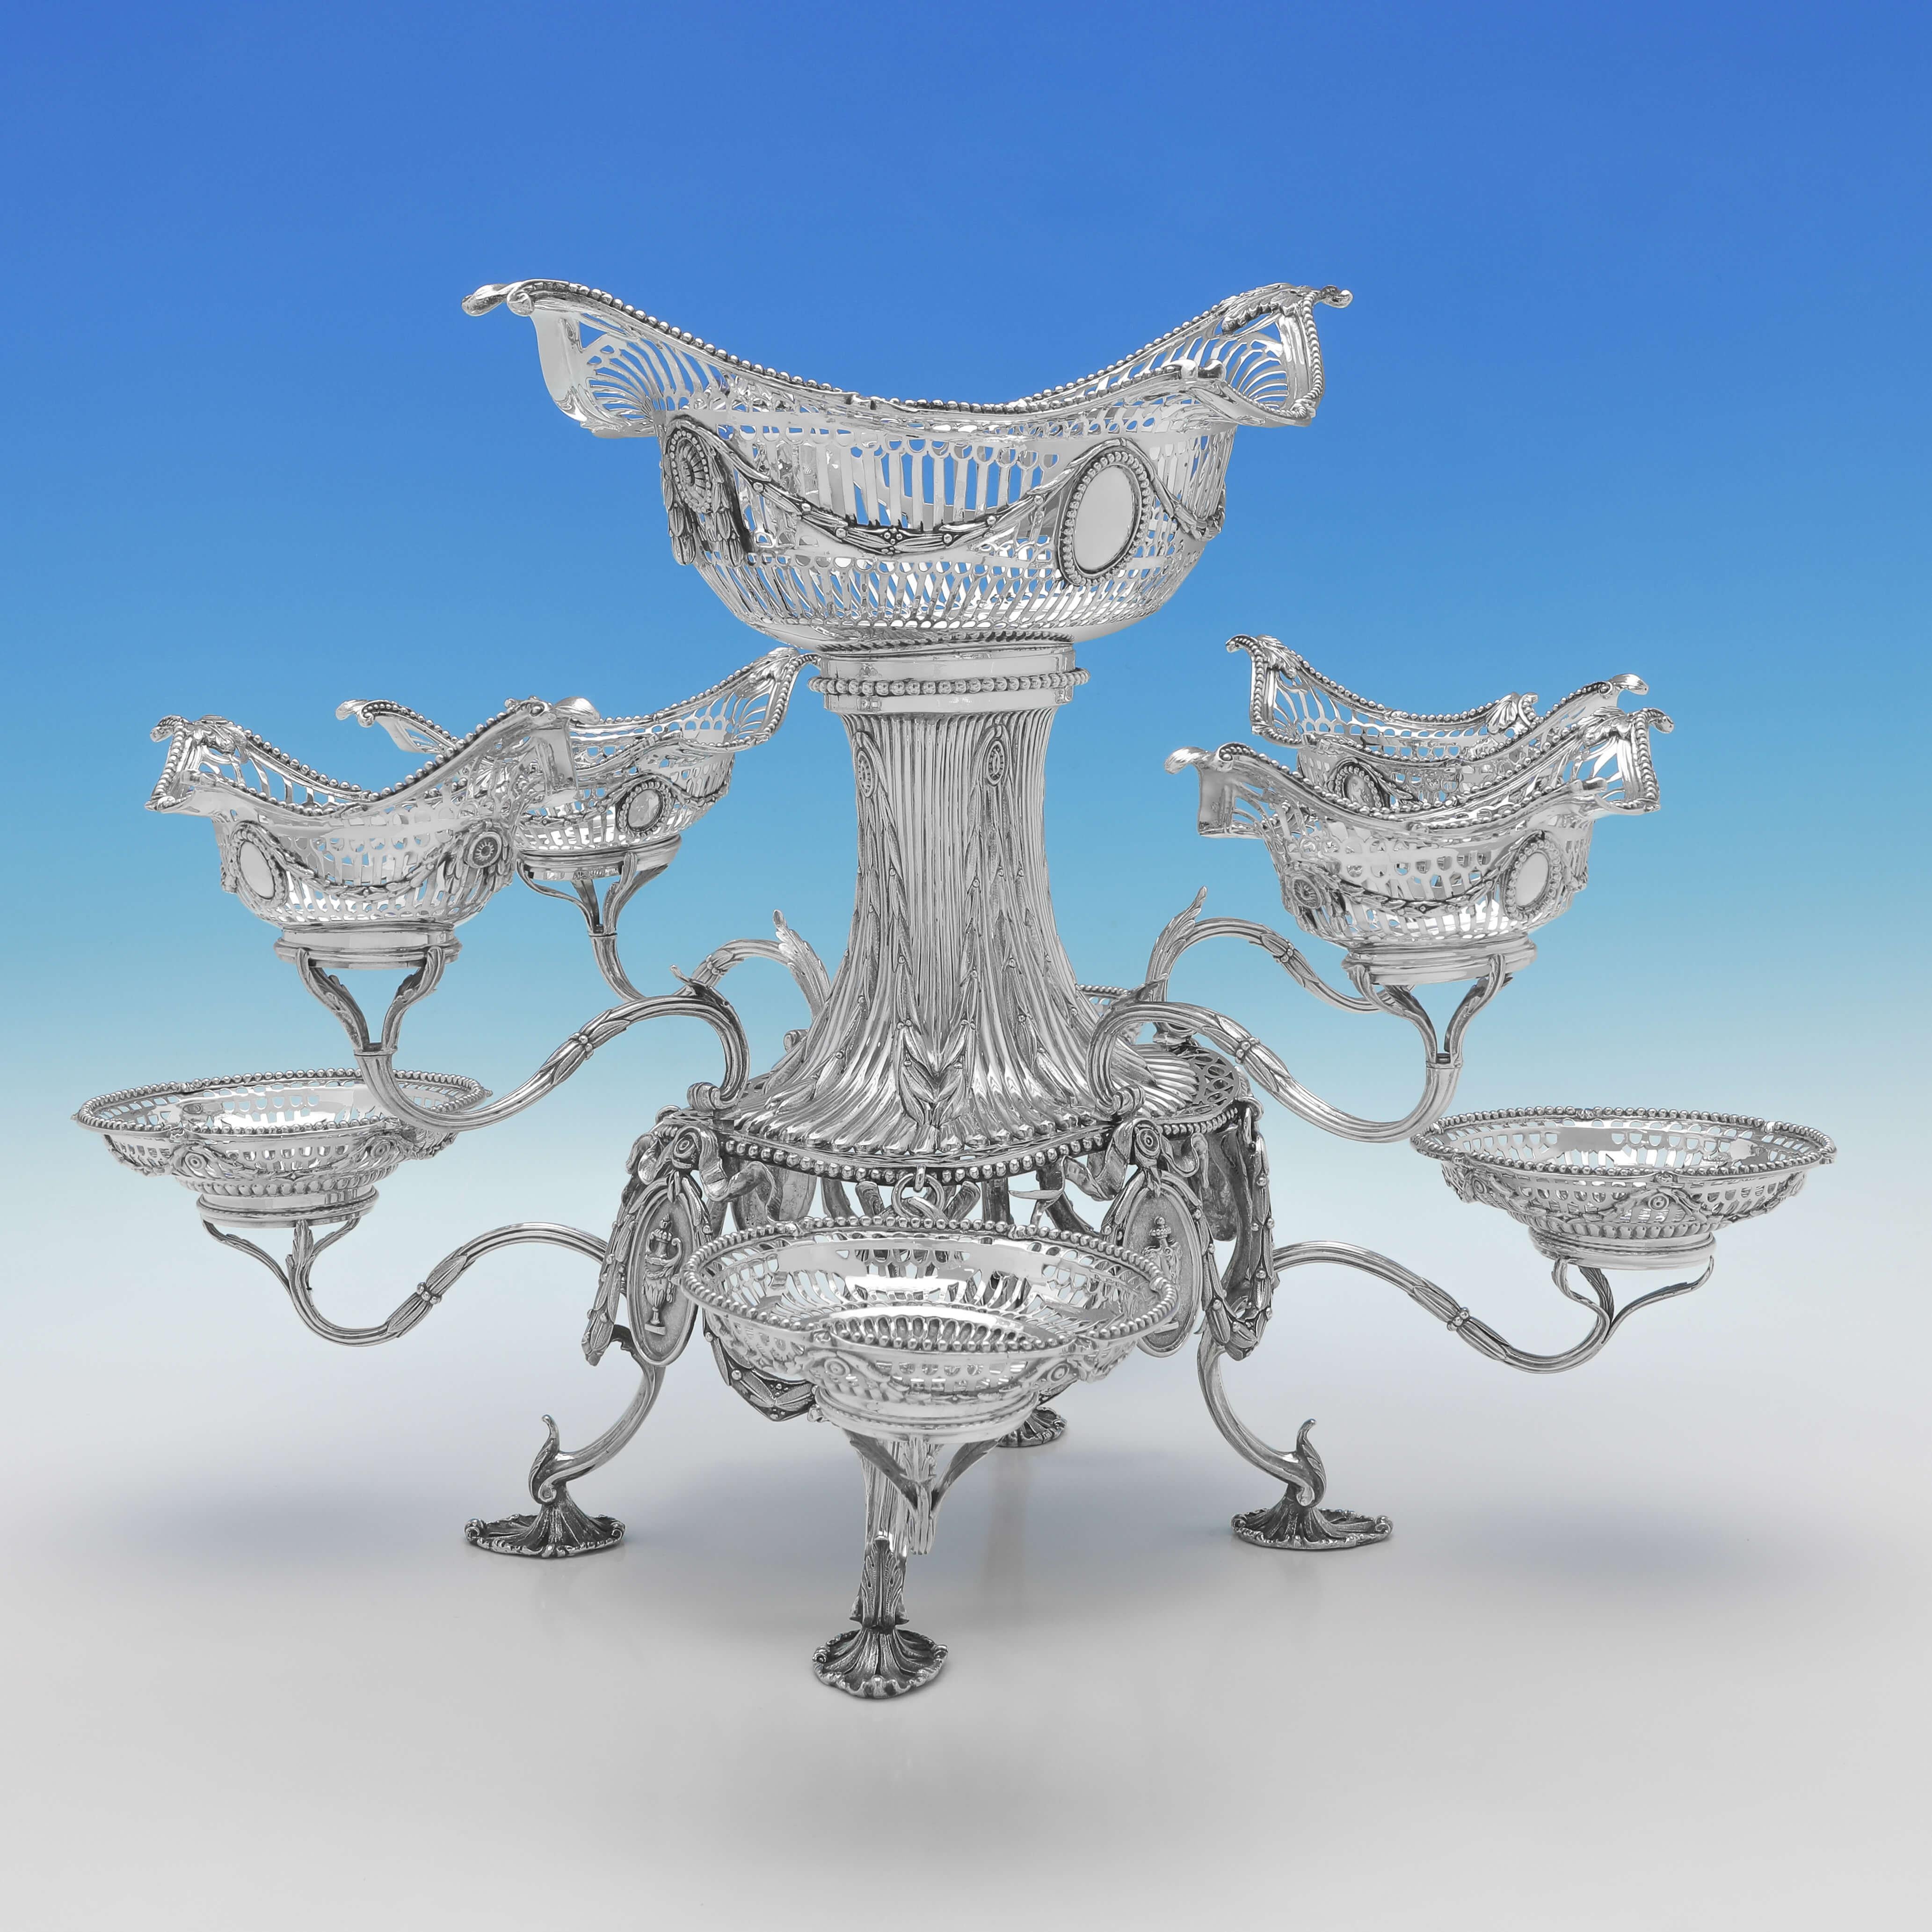 Neoclassical Victorian Antique Sterling Silver Centrepiece or Epergne, 1892 In Good Condition For Sale In London, London